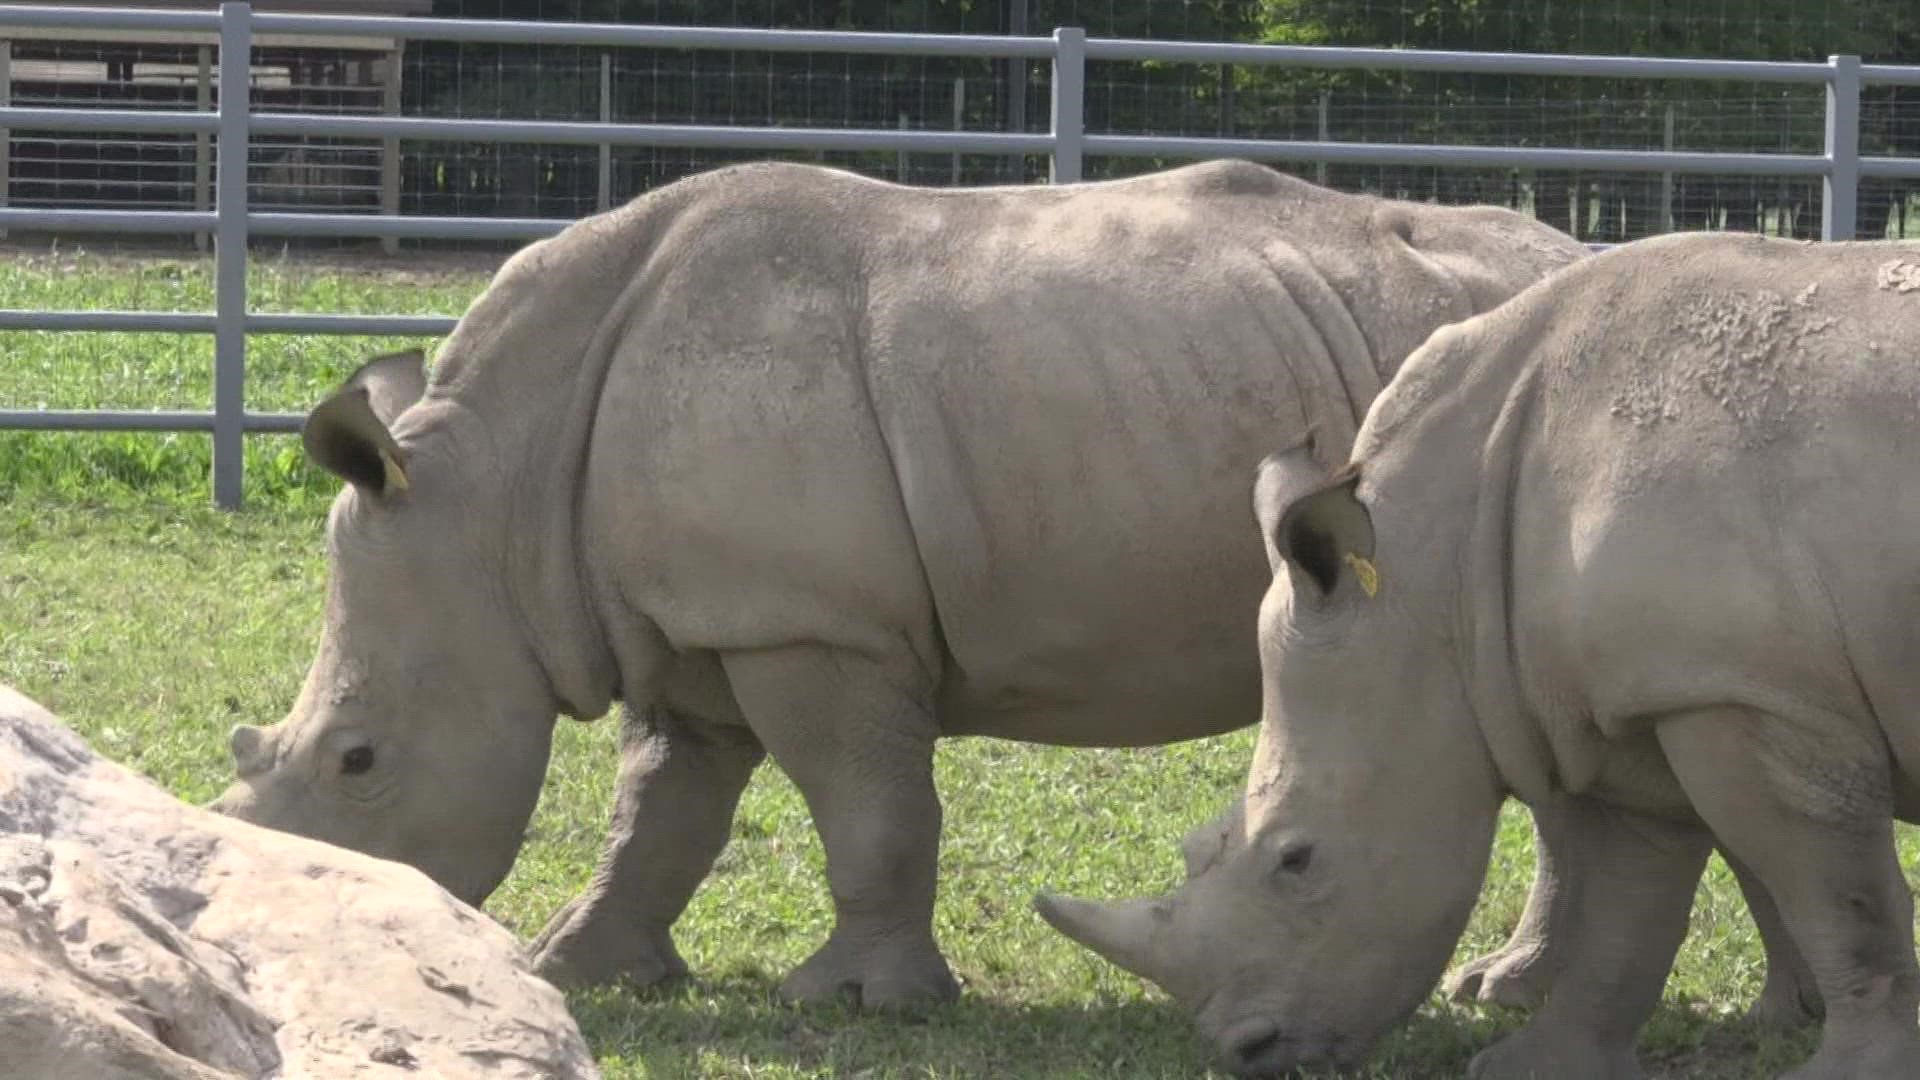 Southern White Rhinos are considered "near threatened" and two of them at Boulder Ridge Wild Animal Park were just imported from South Africa.